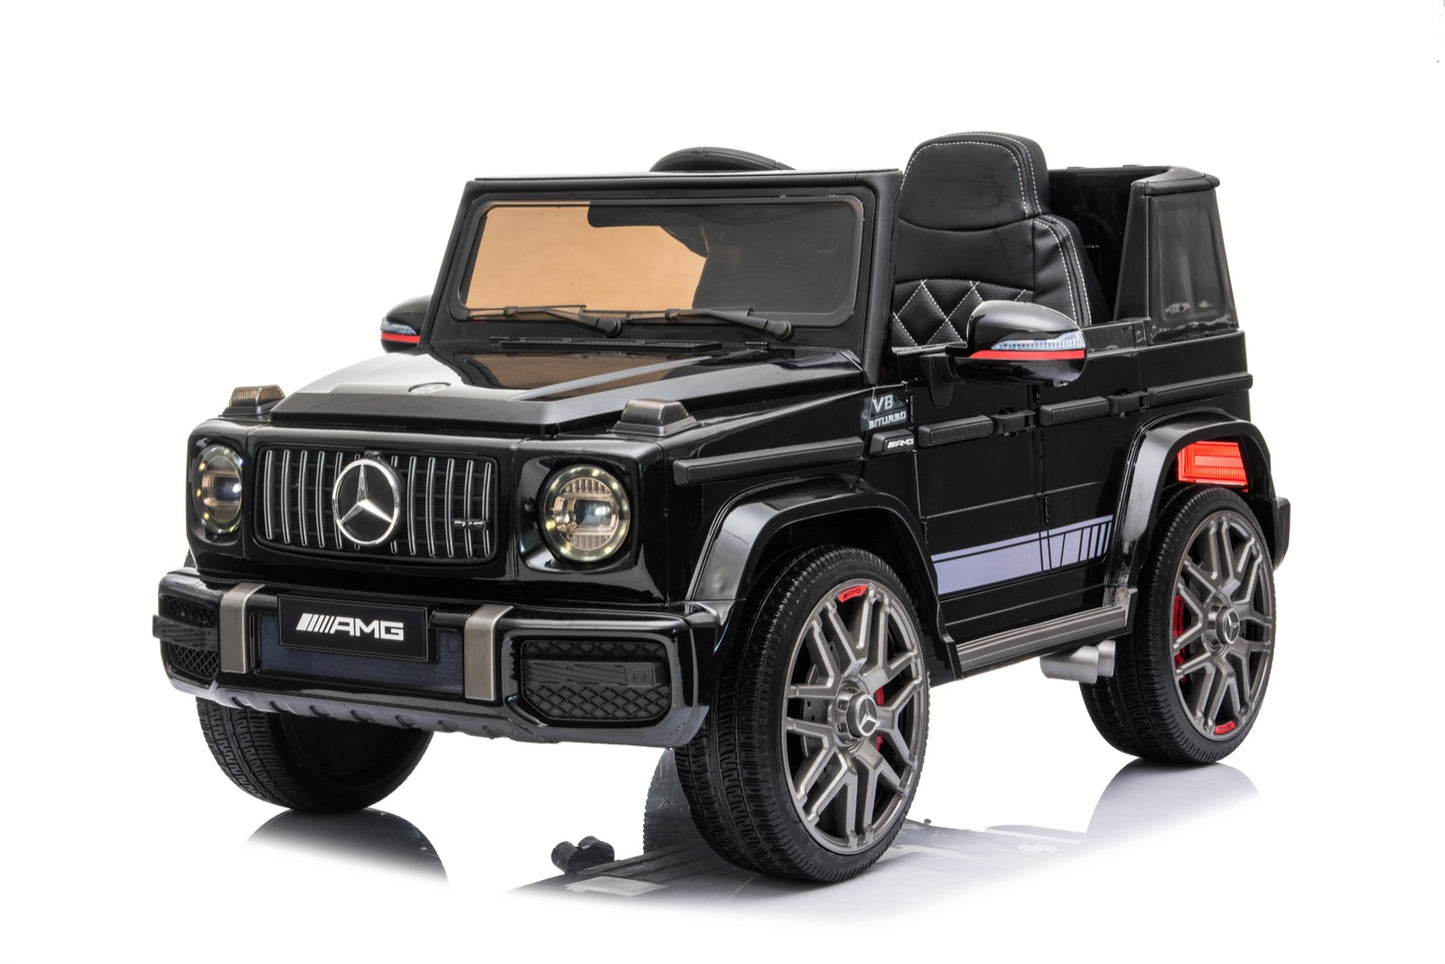 LICENSED Mercedes G63 AMG 12V G Wagon 1 Seat Kids Ride On Car with Remote Control